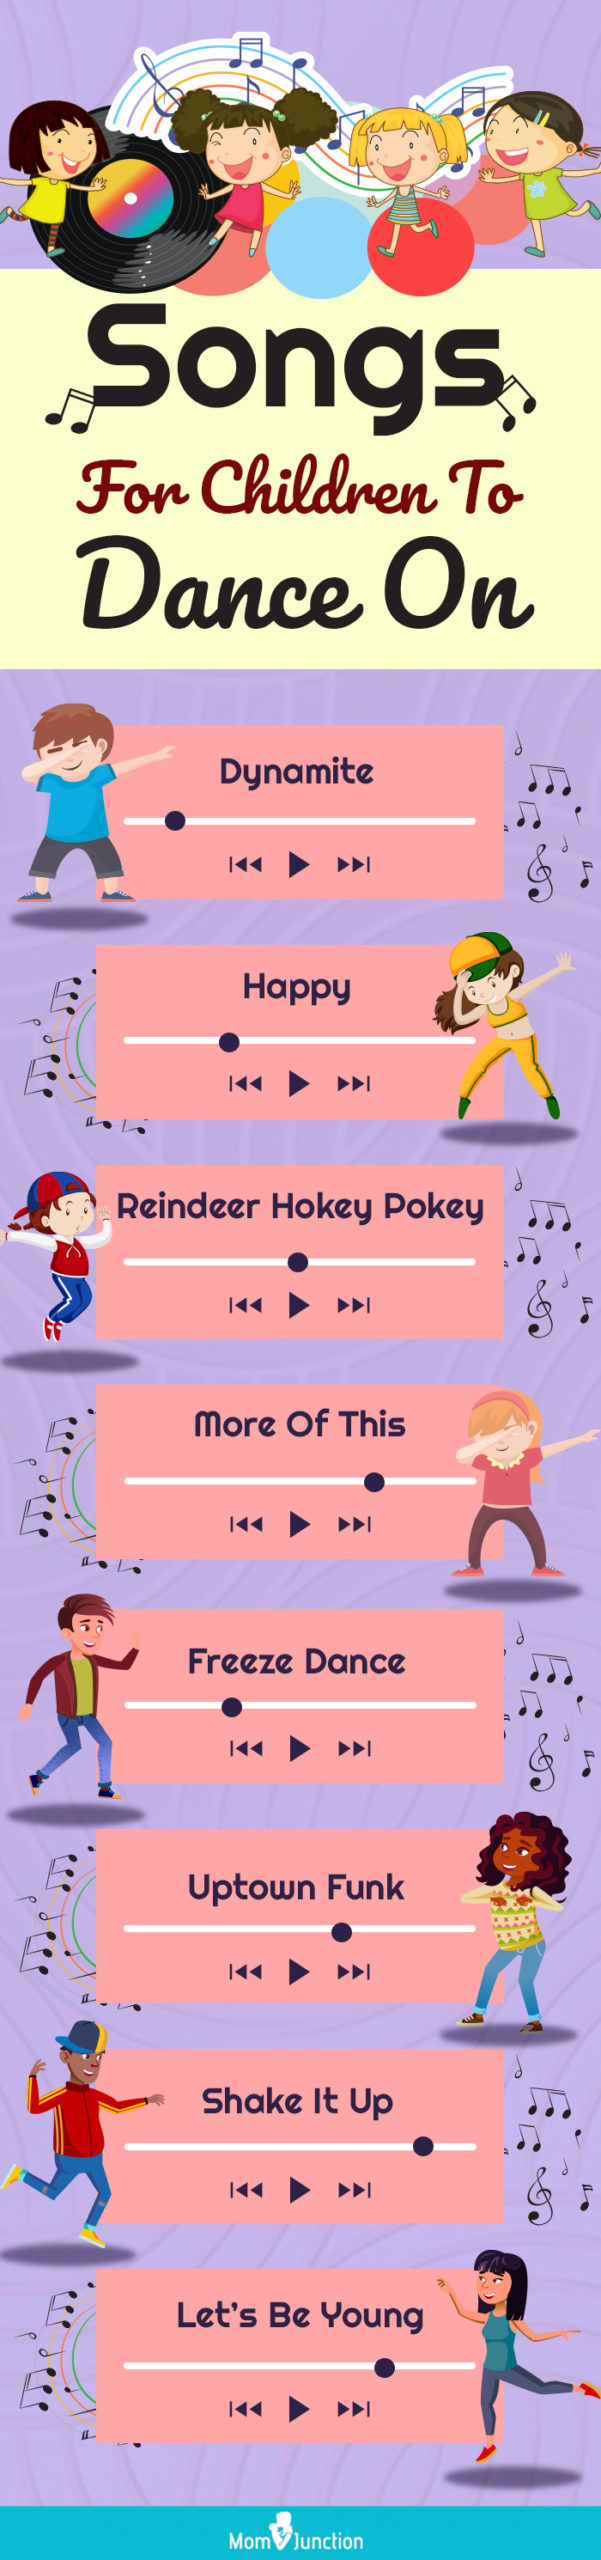 30 Movement Songs for Kids